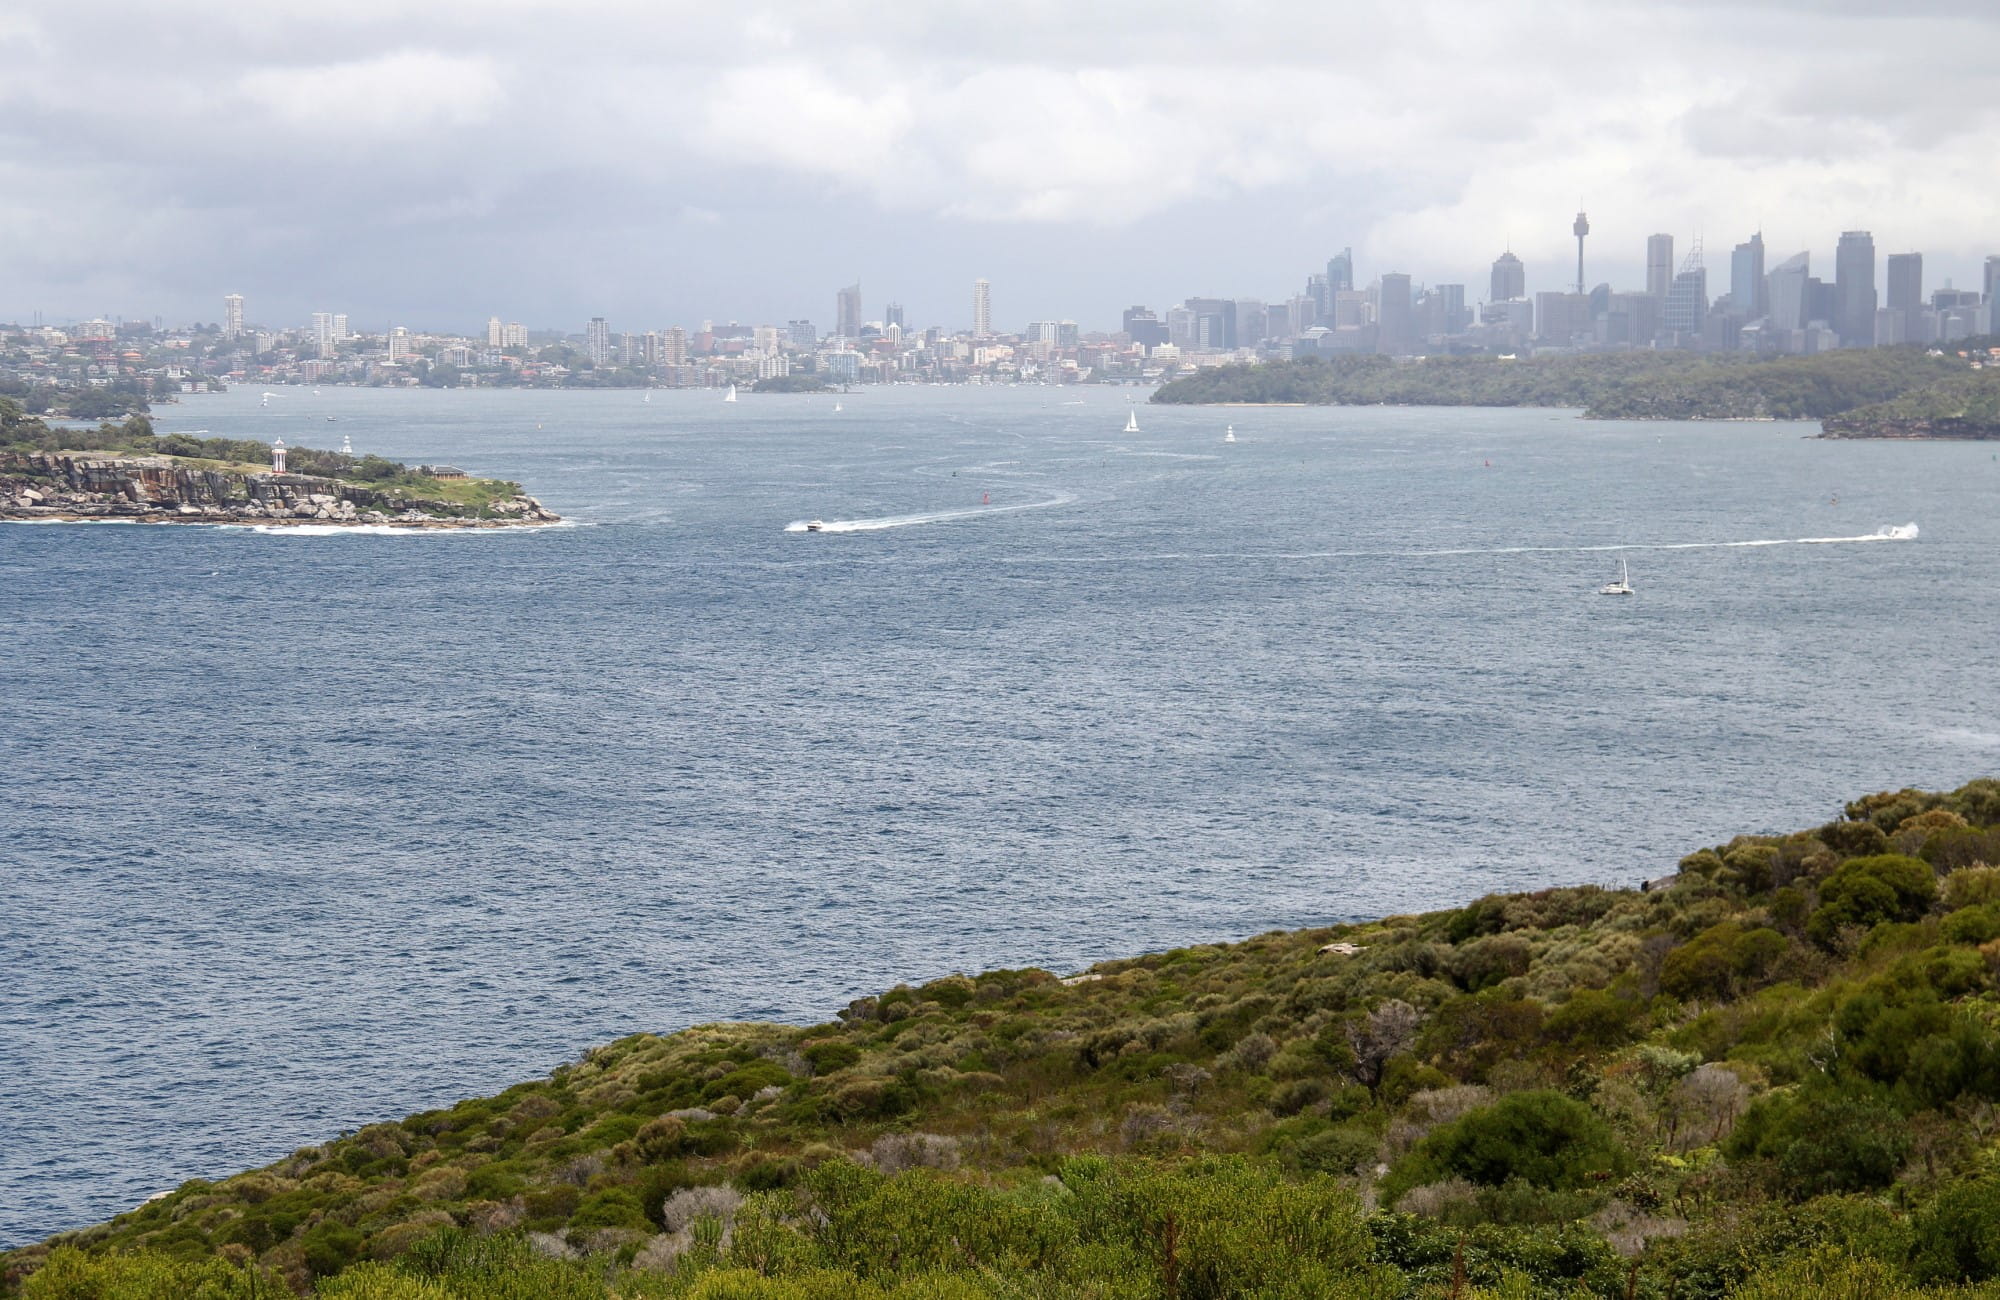 The view from North Head, near Manly in Sydney Harbour National Park. Photo: John Yurasek &copy; DPIE